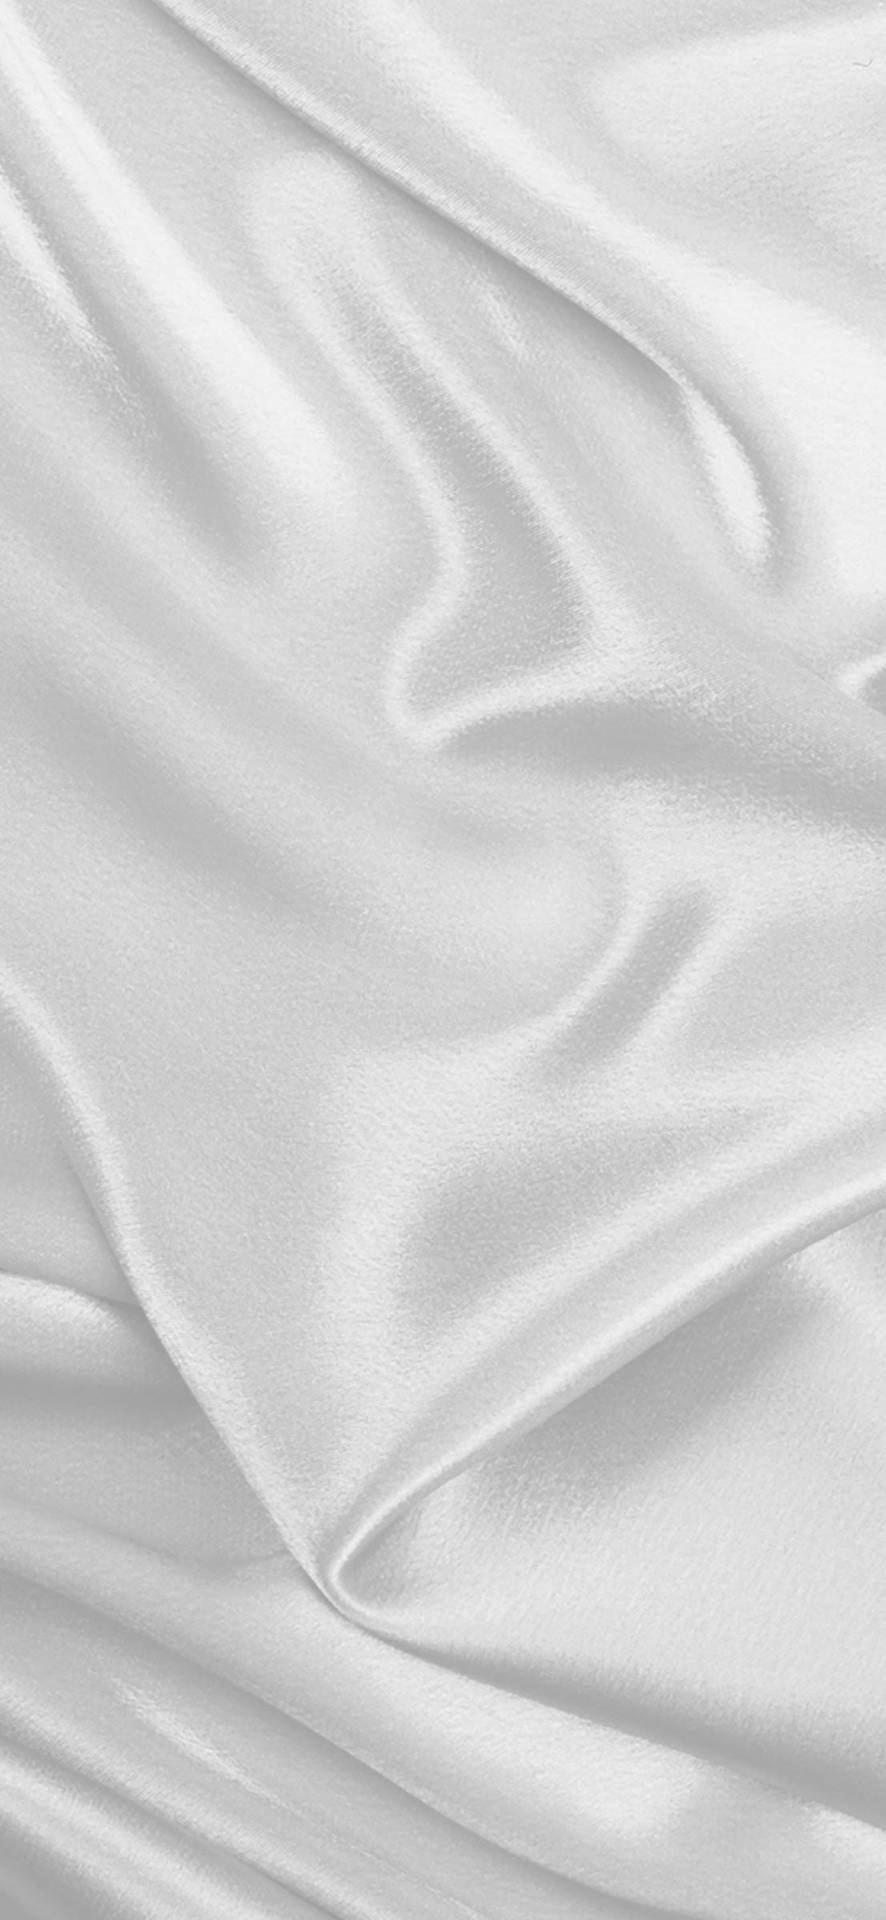 A white background with a wave of white fabric - Silk